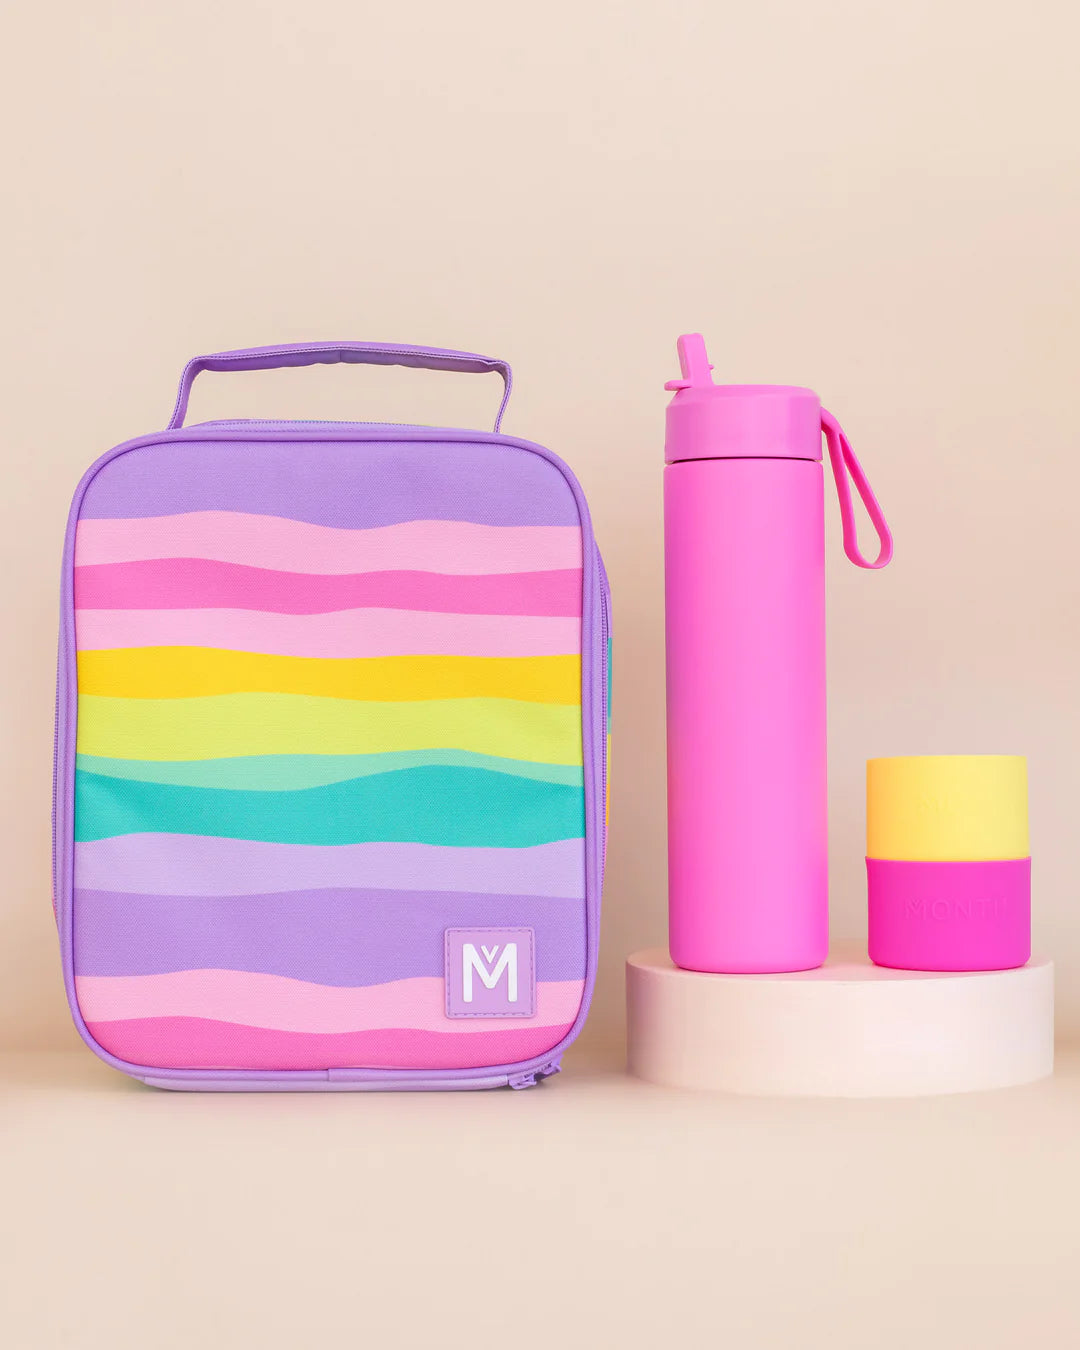 MontiiCo Large Insulated Lunch Bag - Sorbet Sunset